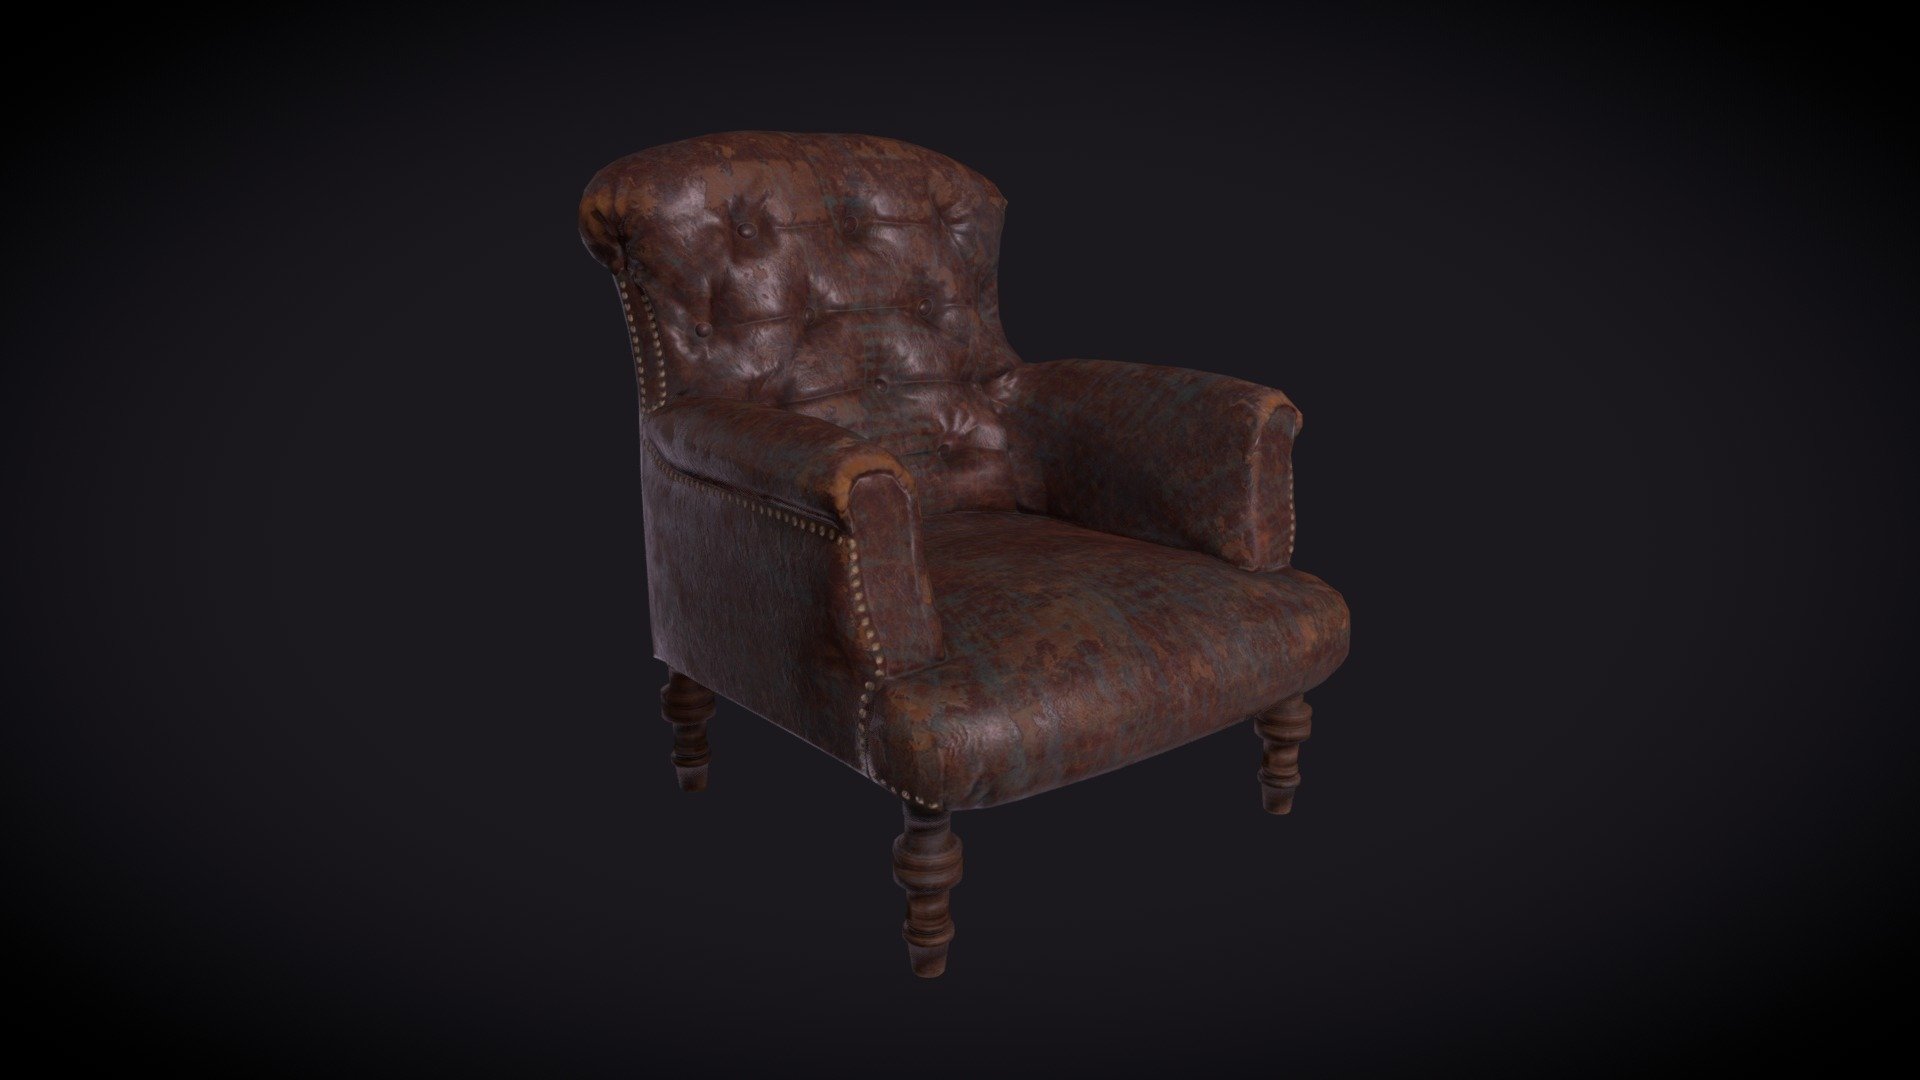 Another armchair for the project I am working on! This one came together pretty quickly overall. Mixer has been great on this project :) - Stylized Leather Armchair - 3D model by cwasden 3d model